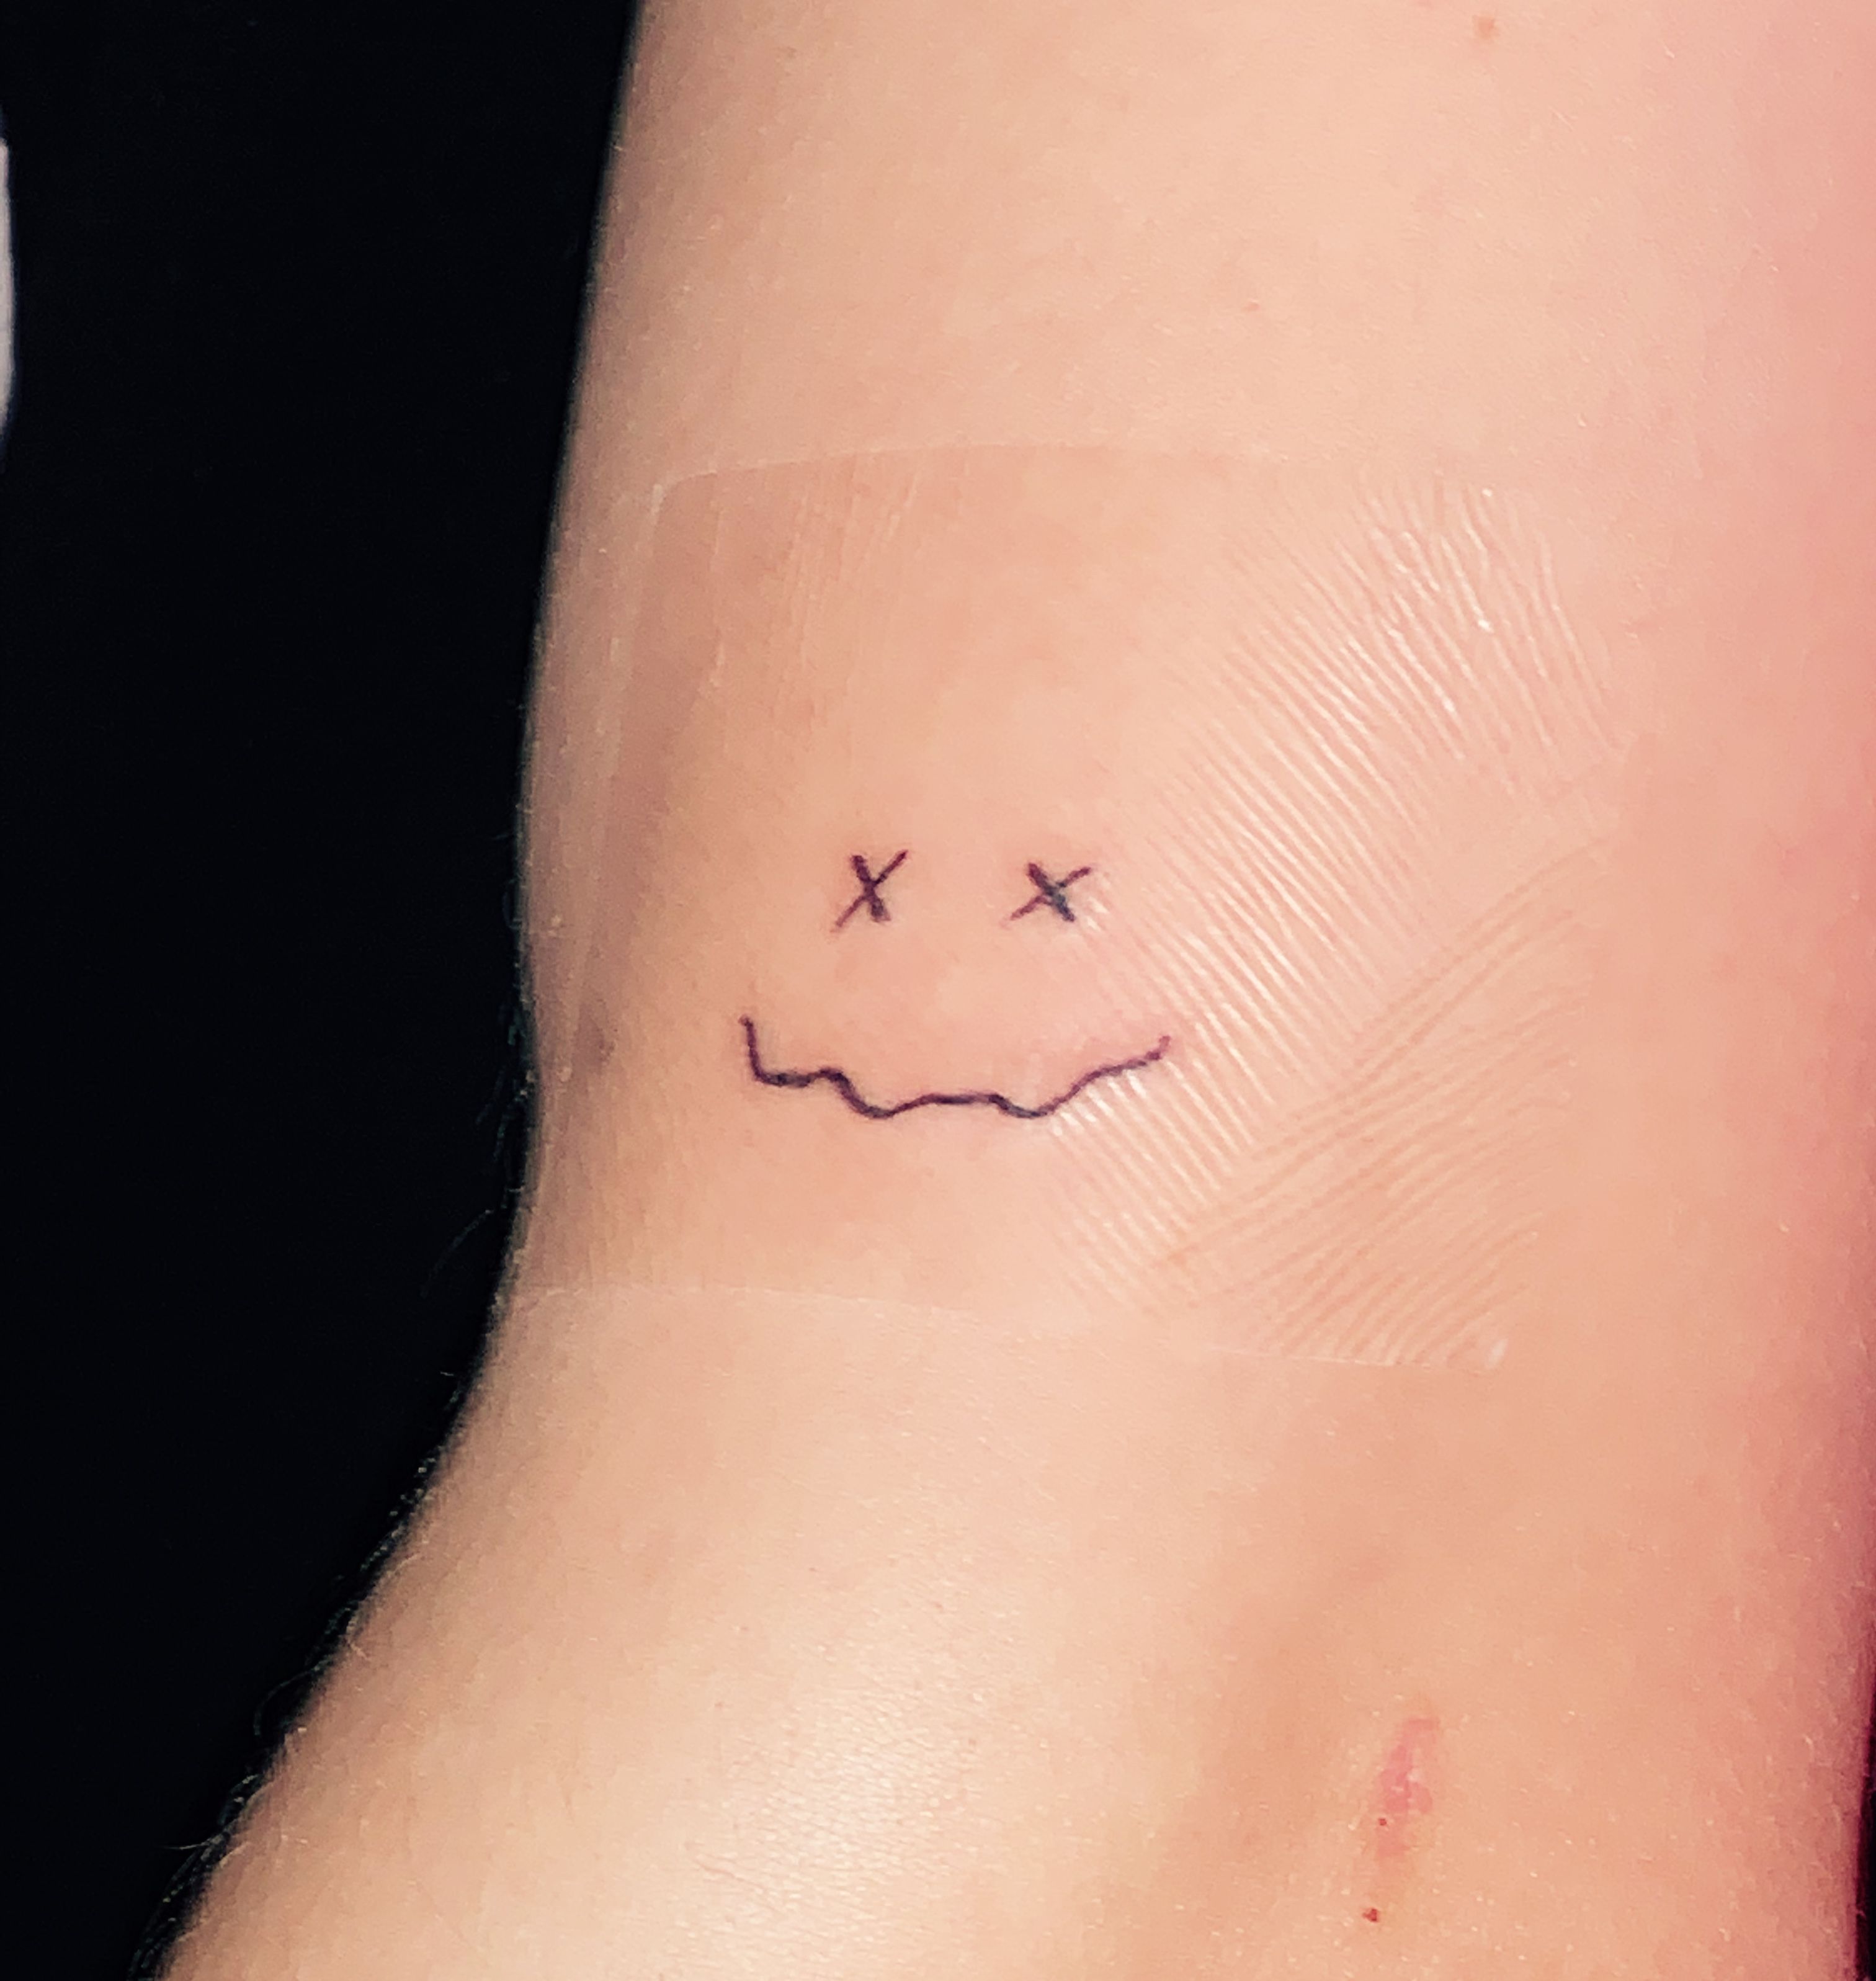 Smiley face tattoo placed on the hand